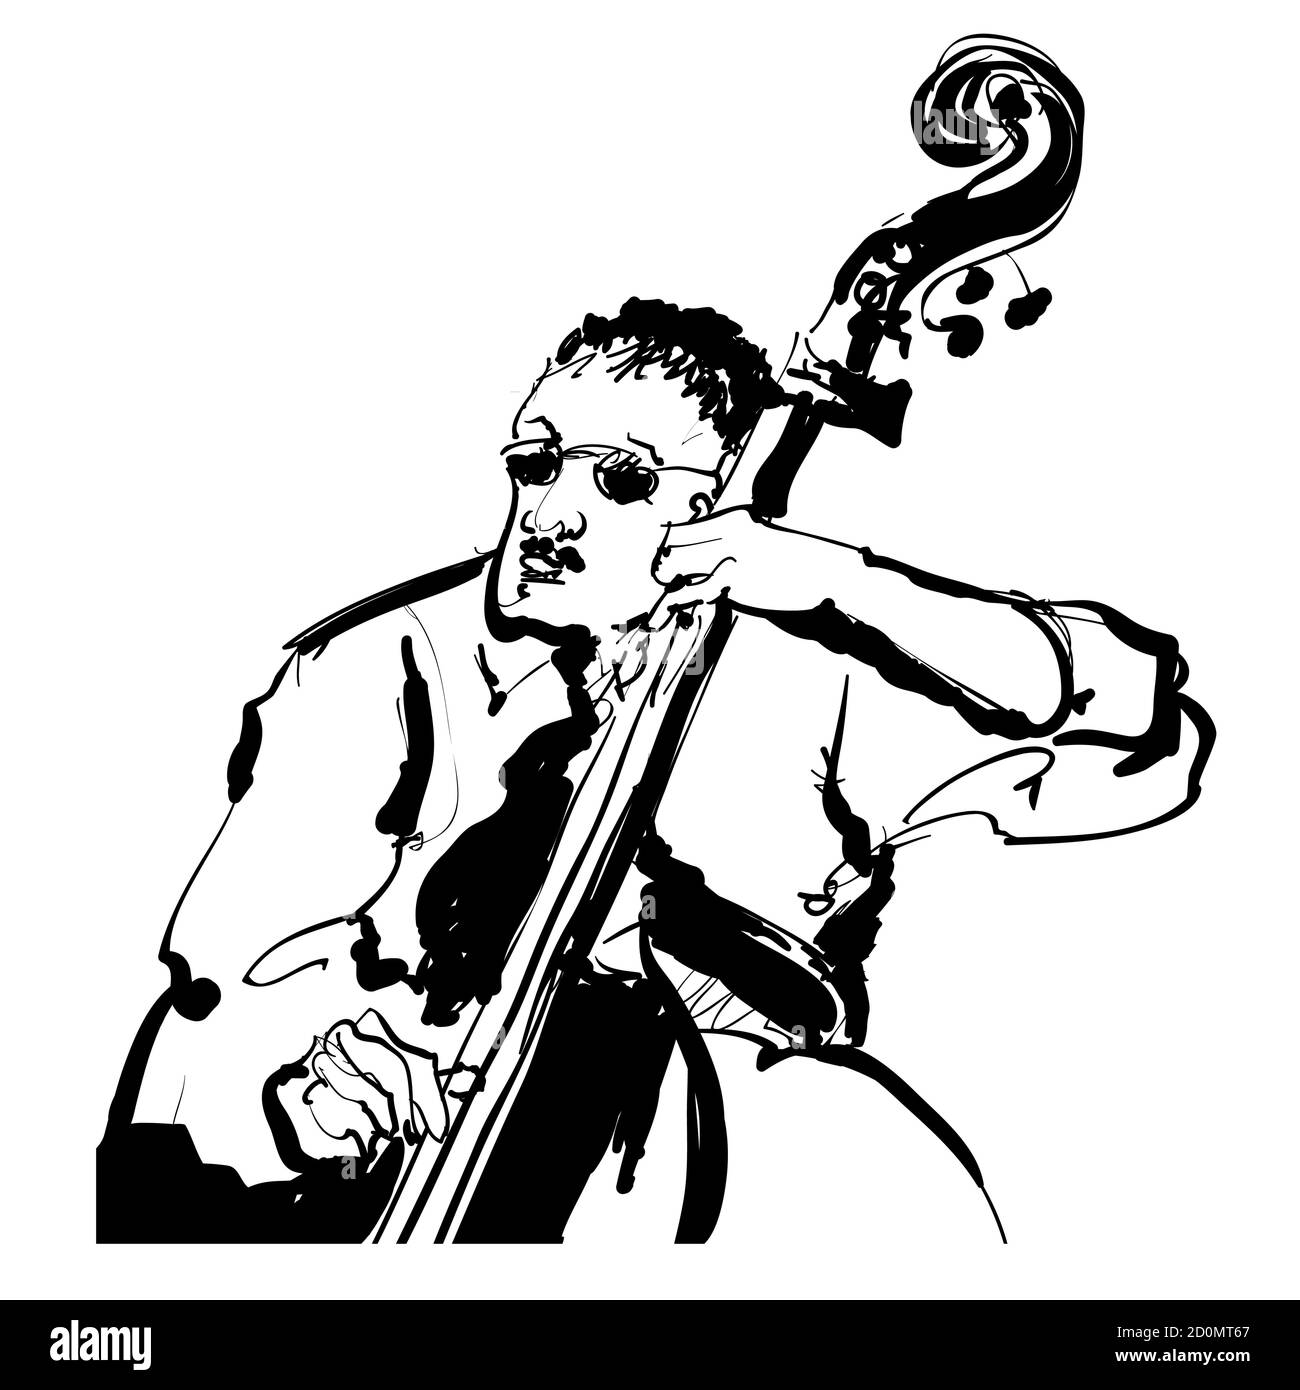 playing double bass - vector illustration Stock Vector